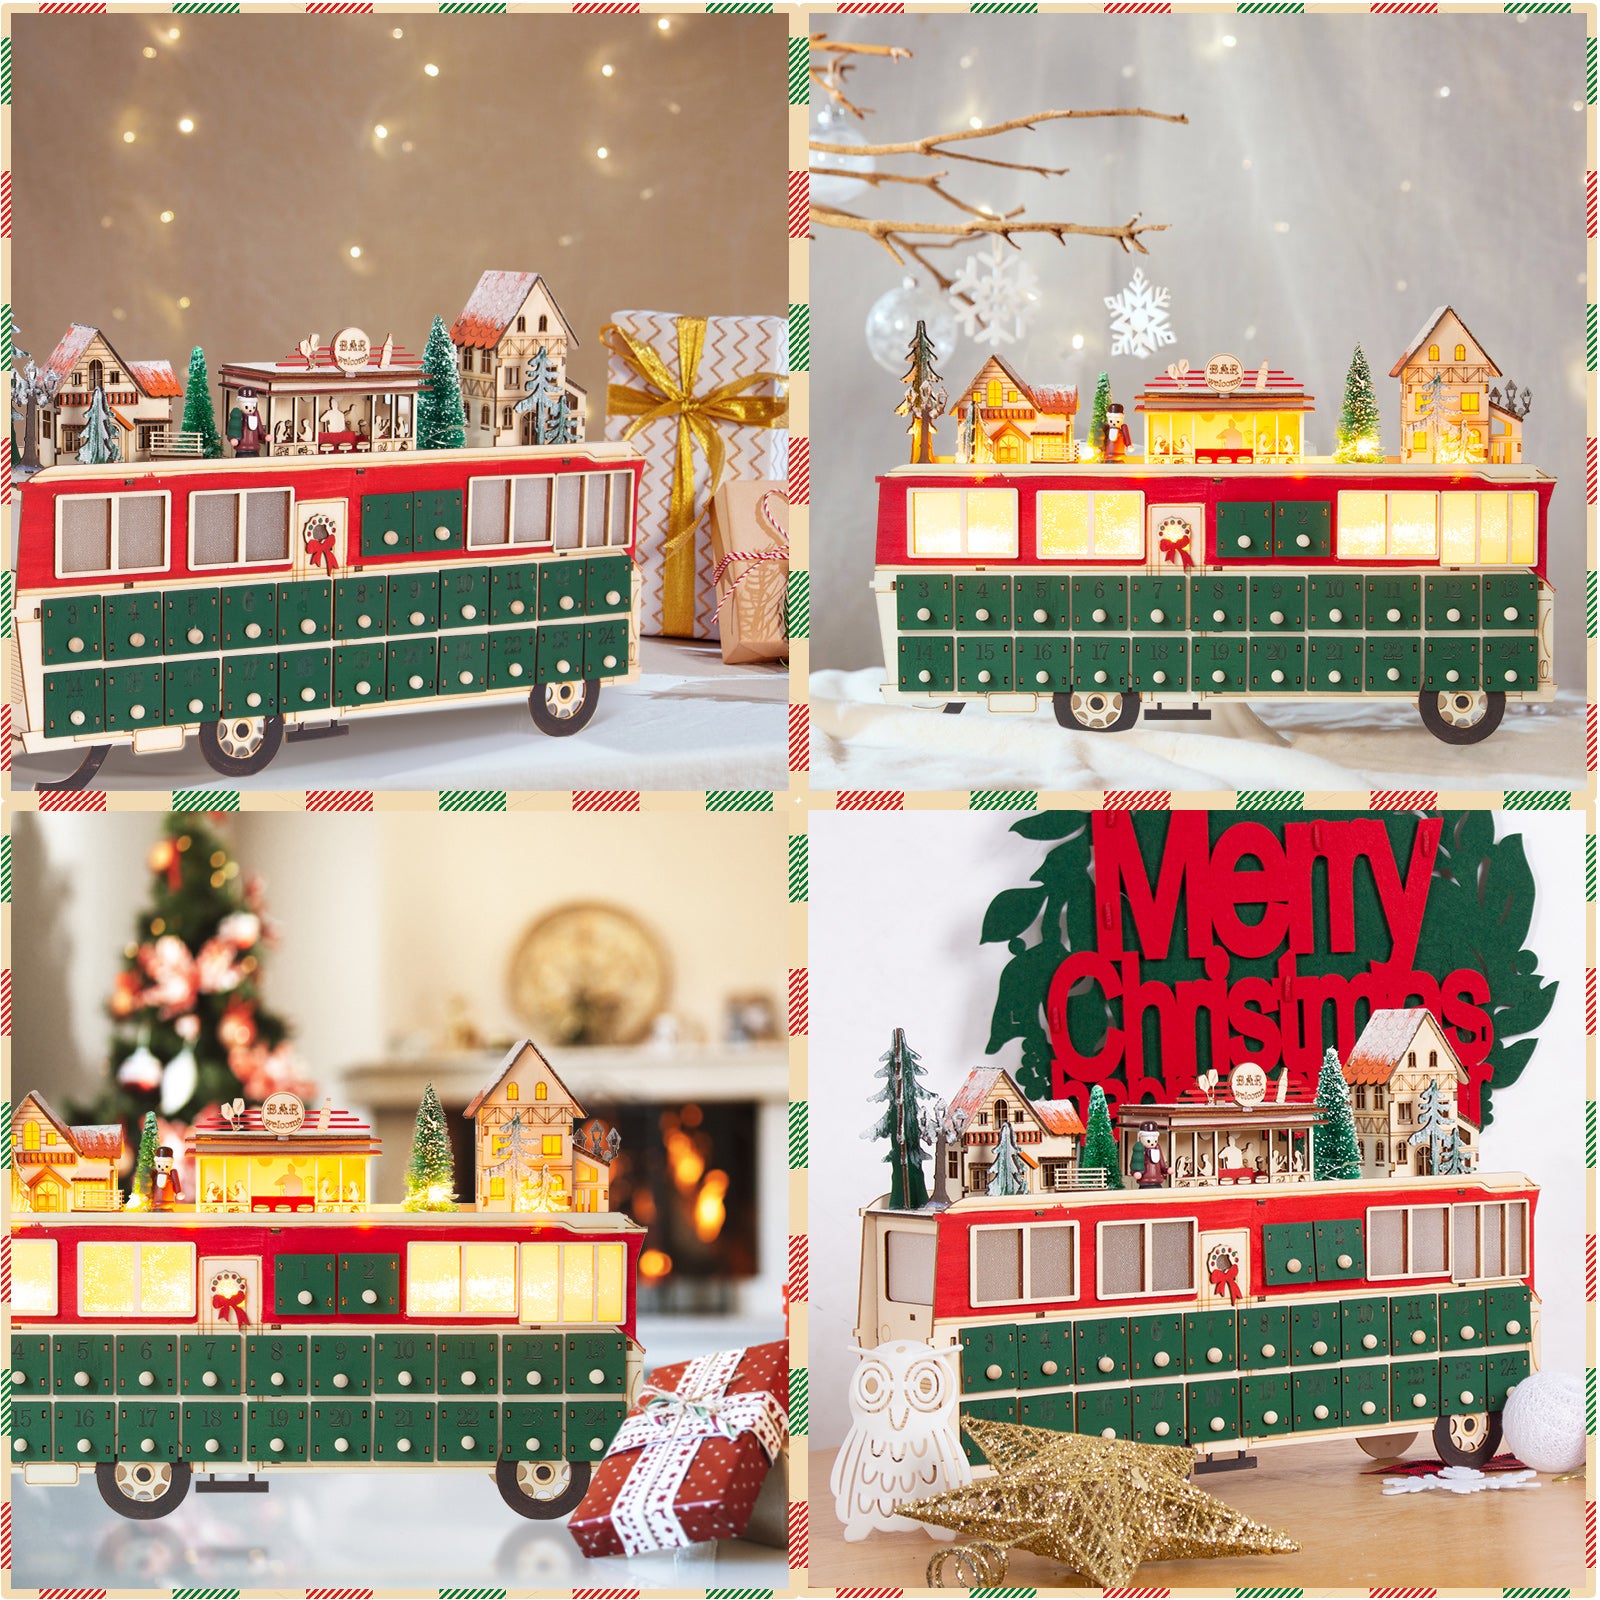 Todeco-Wooden-Advent-Calendar-24-Drawers-to-Fill-Illuminated-Advent-Calendar-Bus-Shape-Wooden-Christmas-Decoration-43-x-8-5-x-28-cm-Wooden-Advent-Calendar